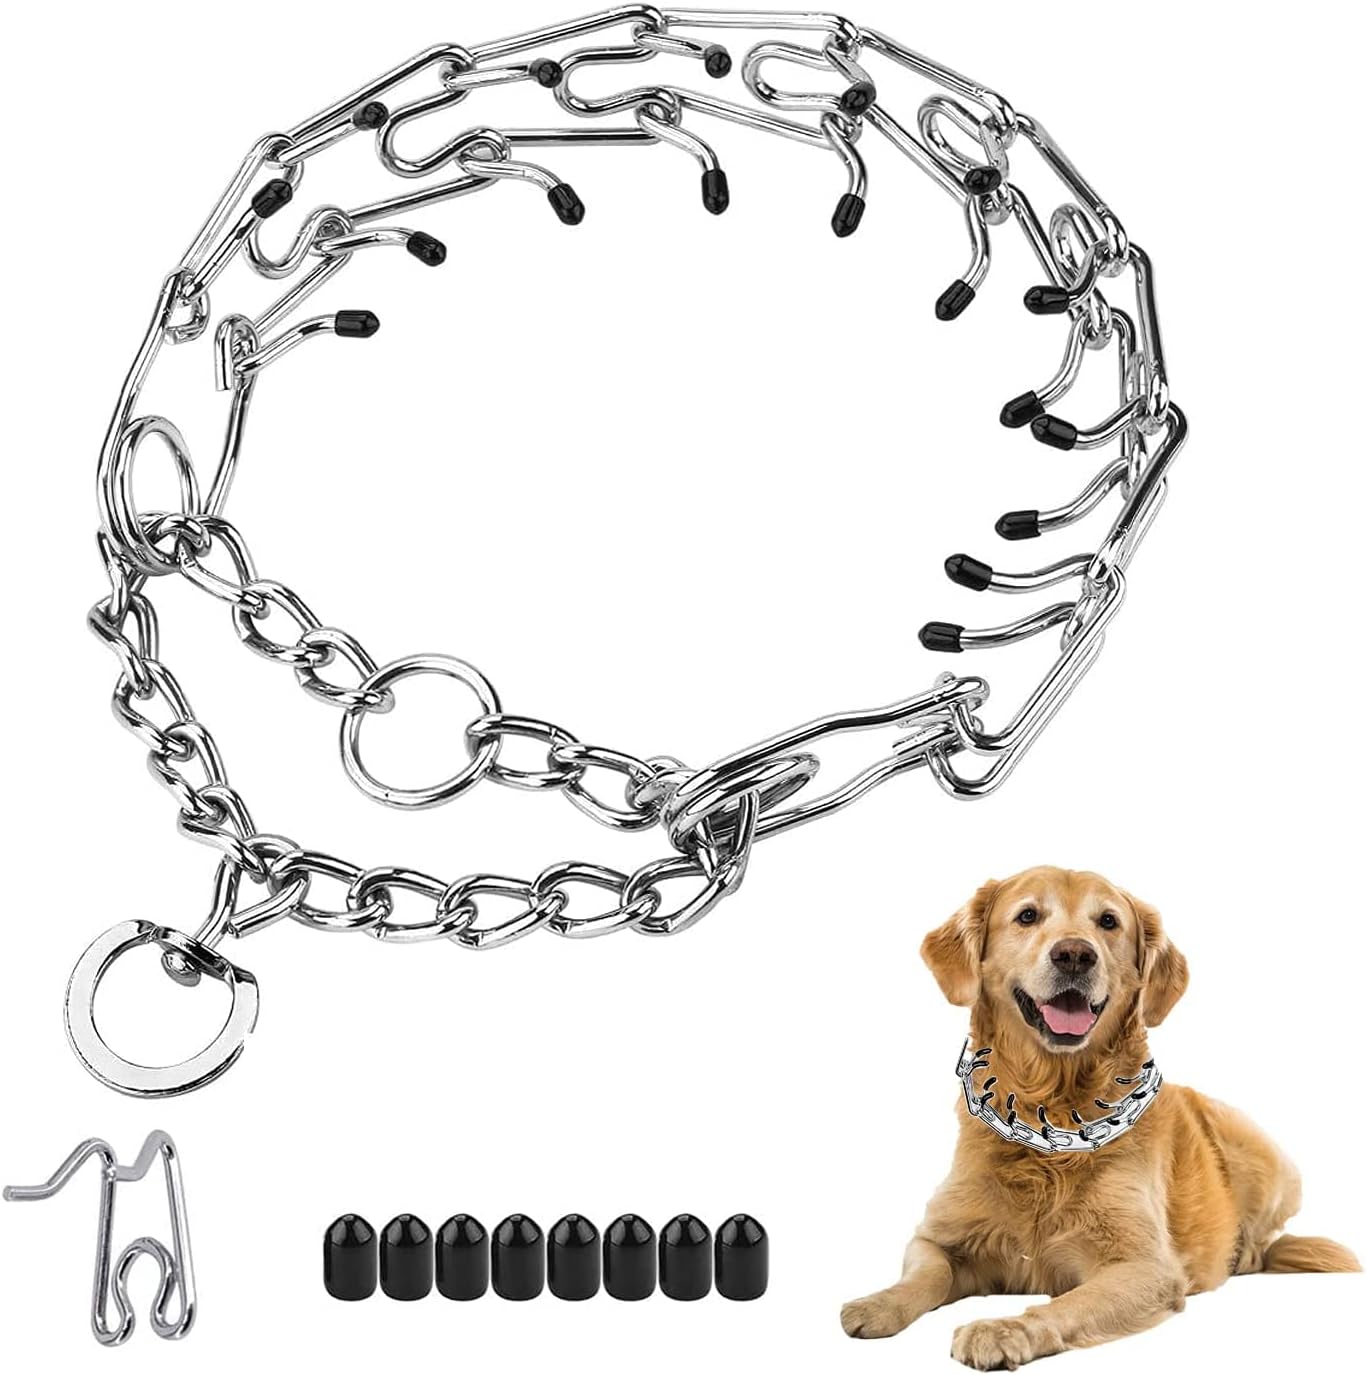 Dog Prong Traing Collar,Dog Choke Pinch Training Collar,Dog Collar Adjustable Stainless Steel Links with Rubber Tips for Medium Large Dogs (XL)